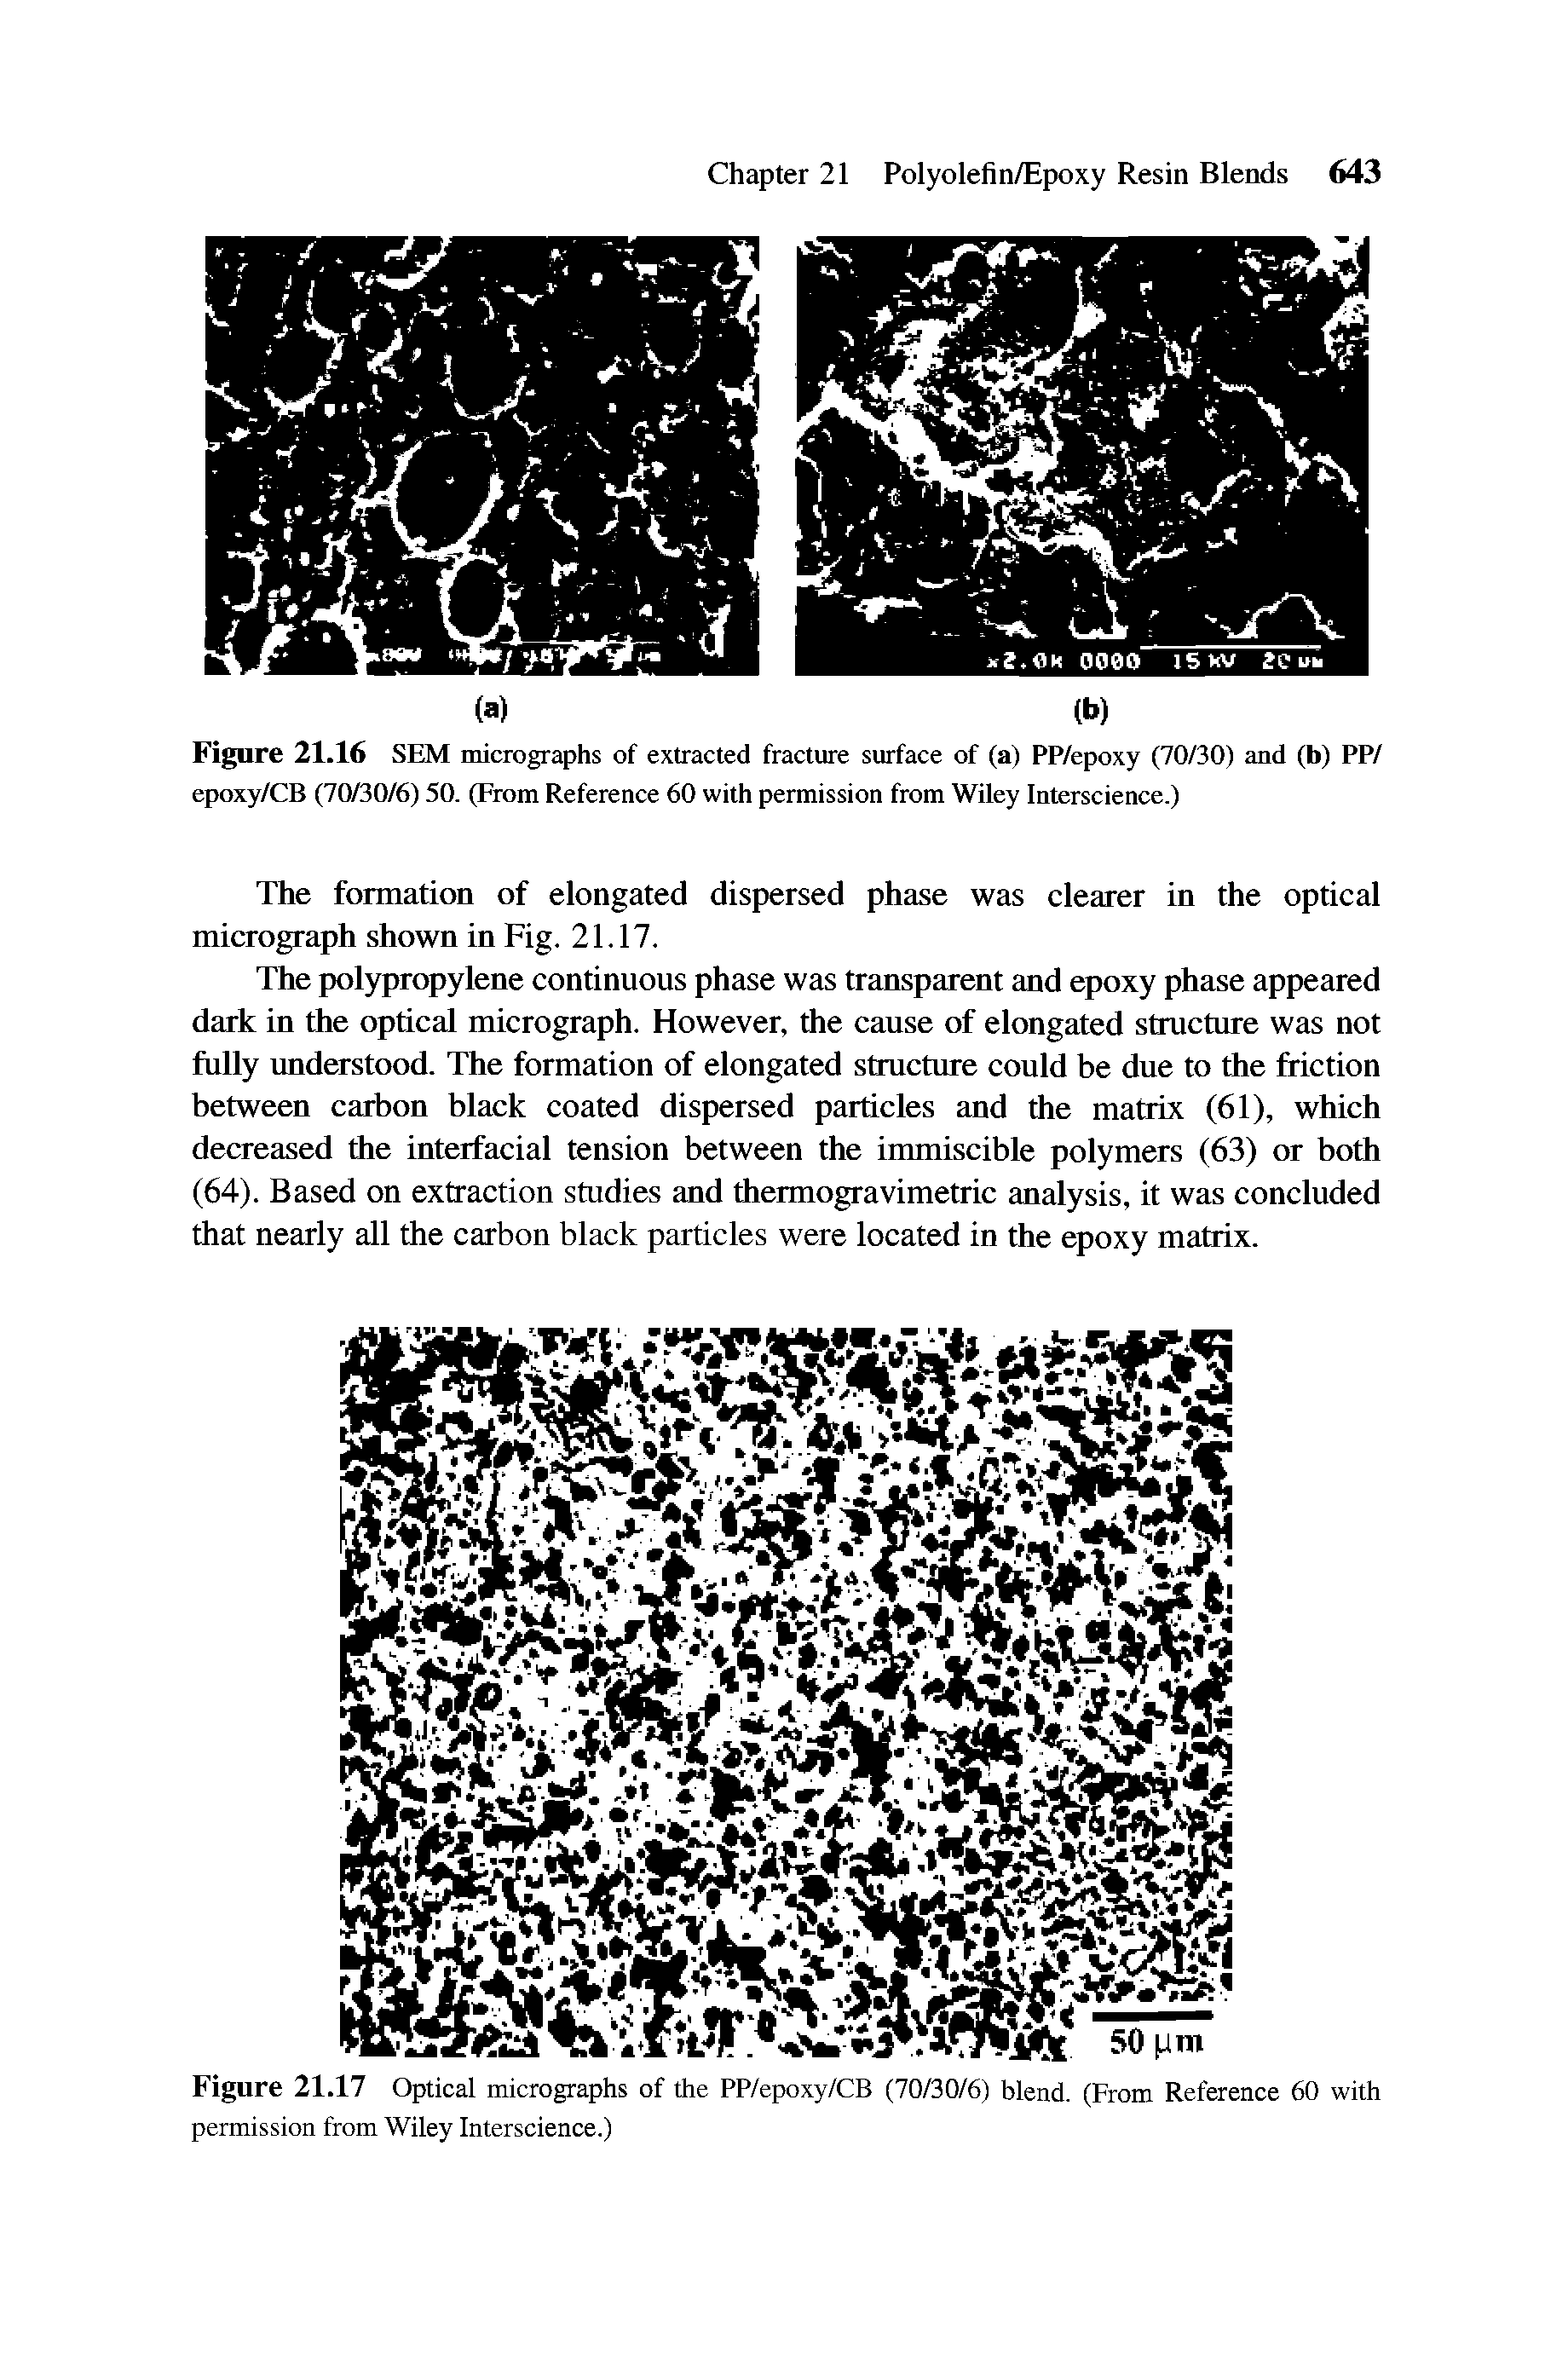 Figure 21.17 Optical micrographs of the PP/epoxy/CB (70/30/6) blend. (From Reference 60 with permission from Wiley Interscience.)...